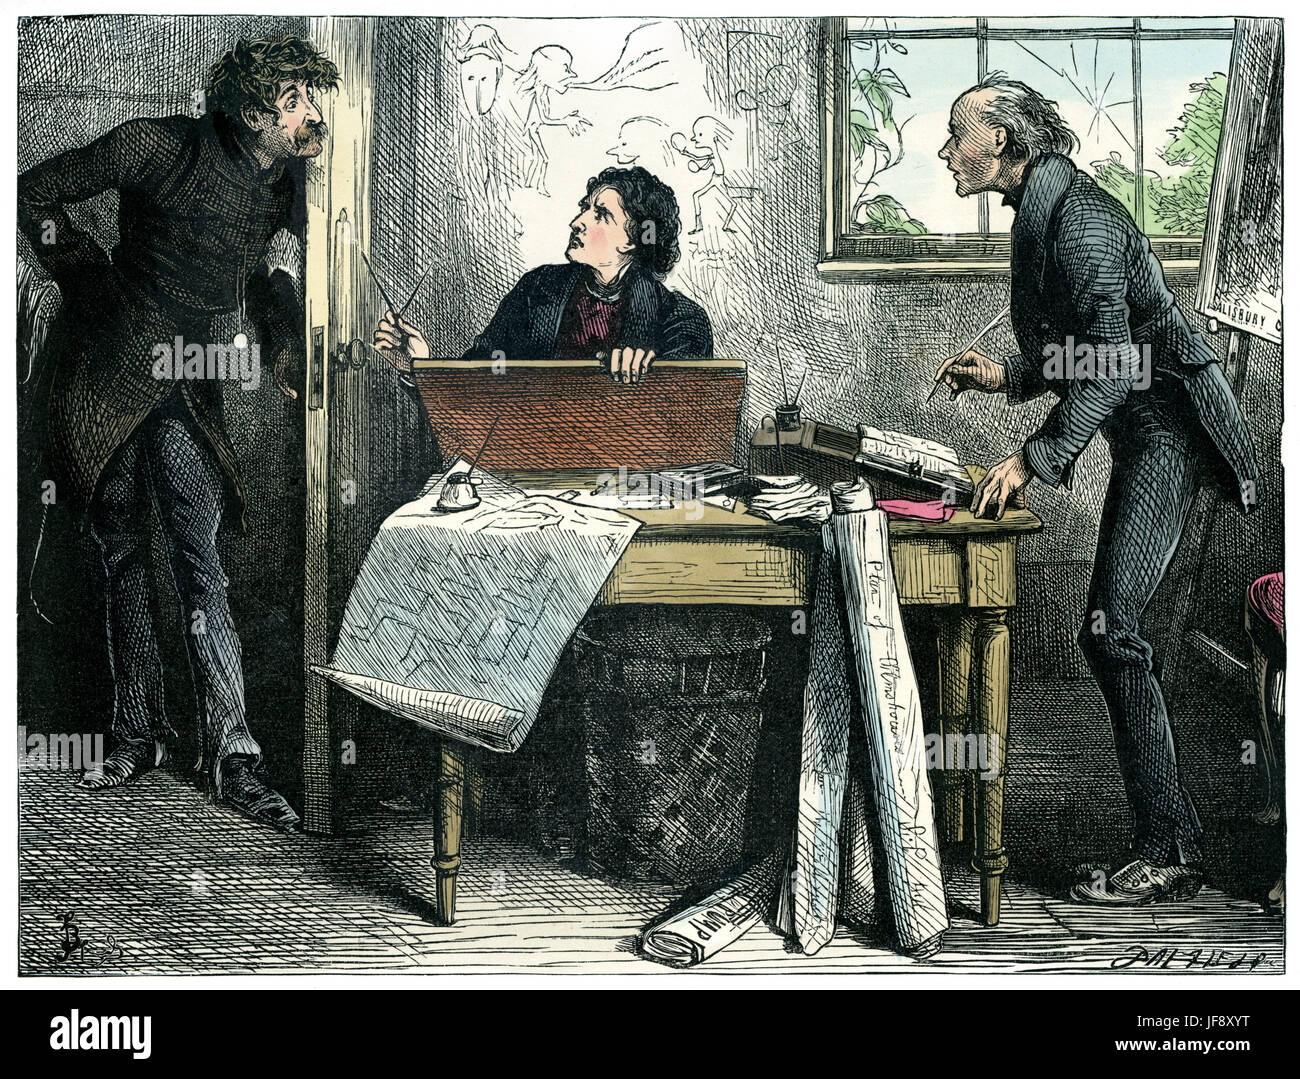 Martin Chuzzlewit, novel by Charles Dickens (7 February 1812 – 9 June 1870). Chapter 7: Martin and Tom Pinch meet Mr. Tigg - 'You're a pair of Whittingtons, gents, without the cat'. Illustration by Fred Barnard (16 May 1846 – 28 September 1896) Stock Photo